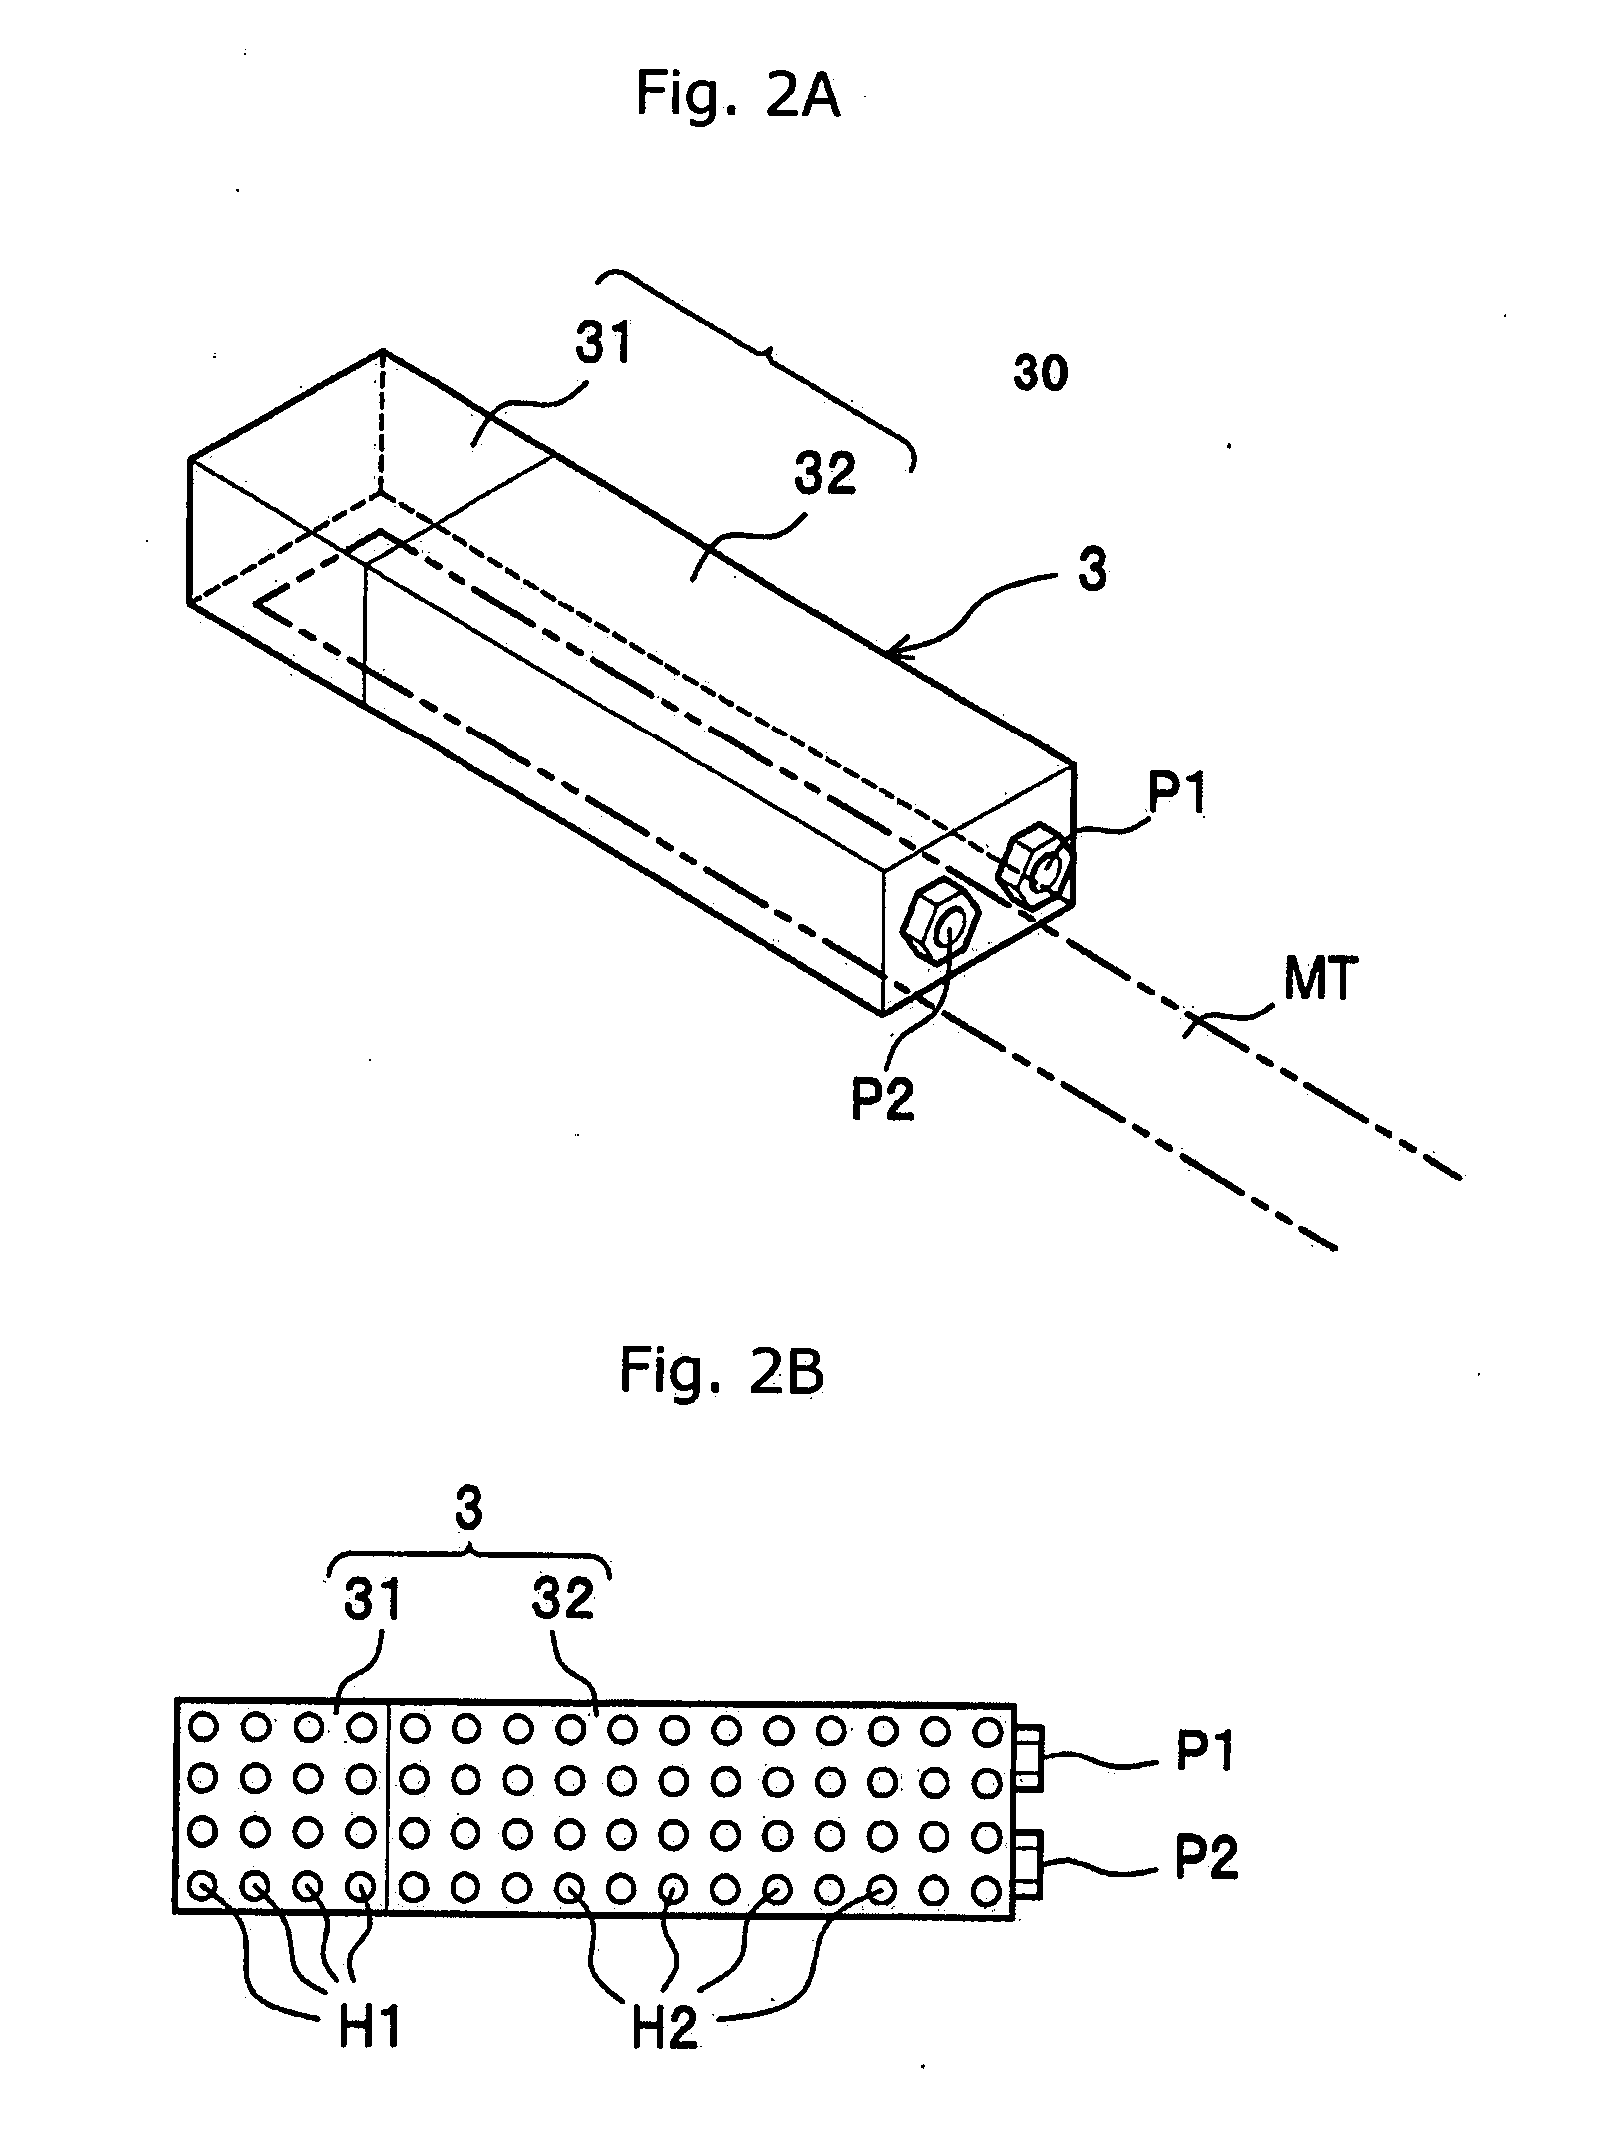 Method of and apparatus for sticking tape on reel hub and method of and apparatus for winding tape on tape reel in tape cartridge